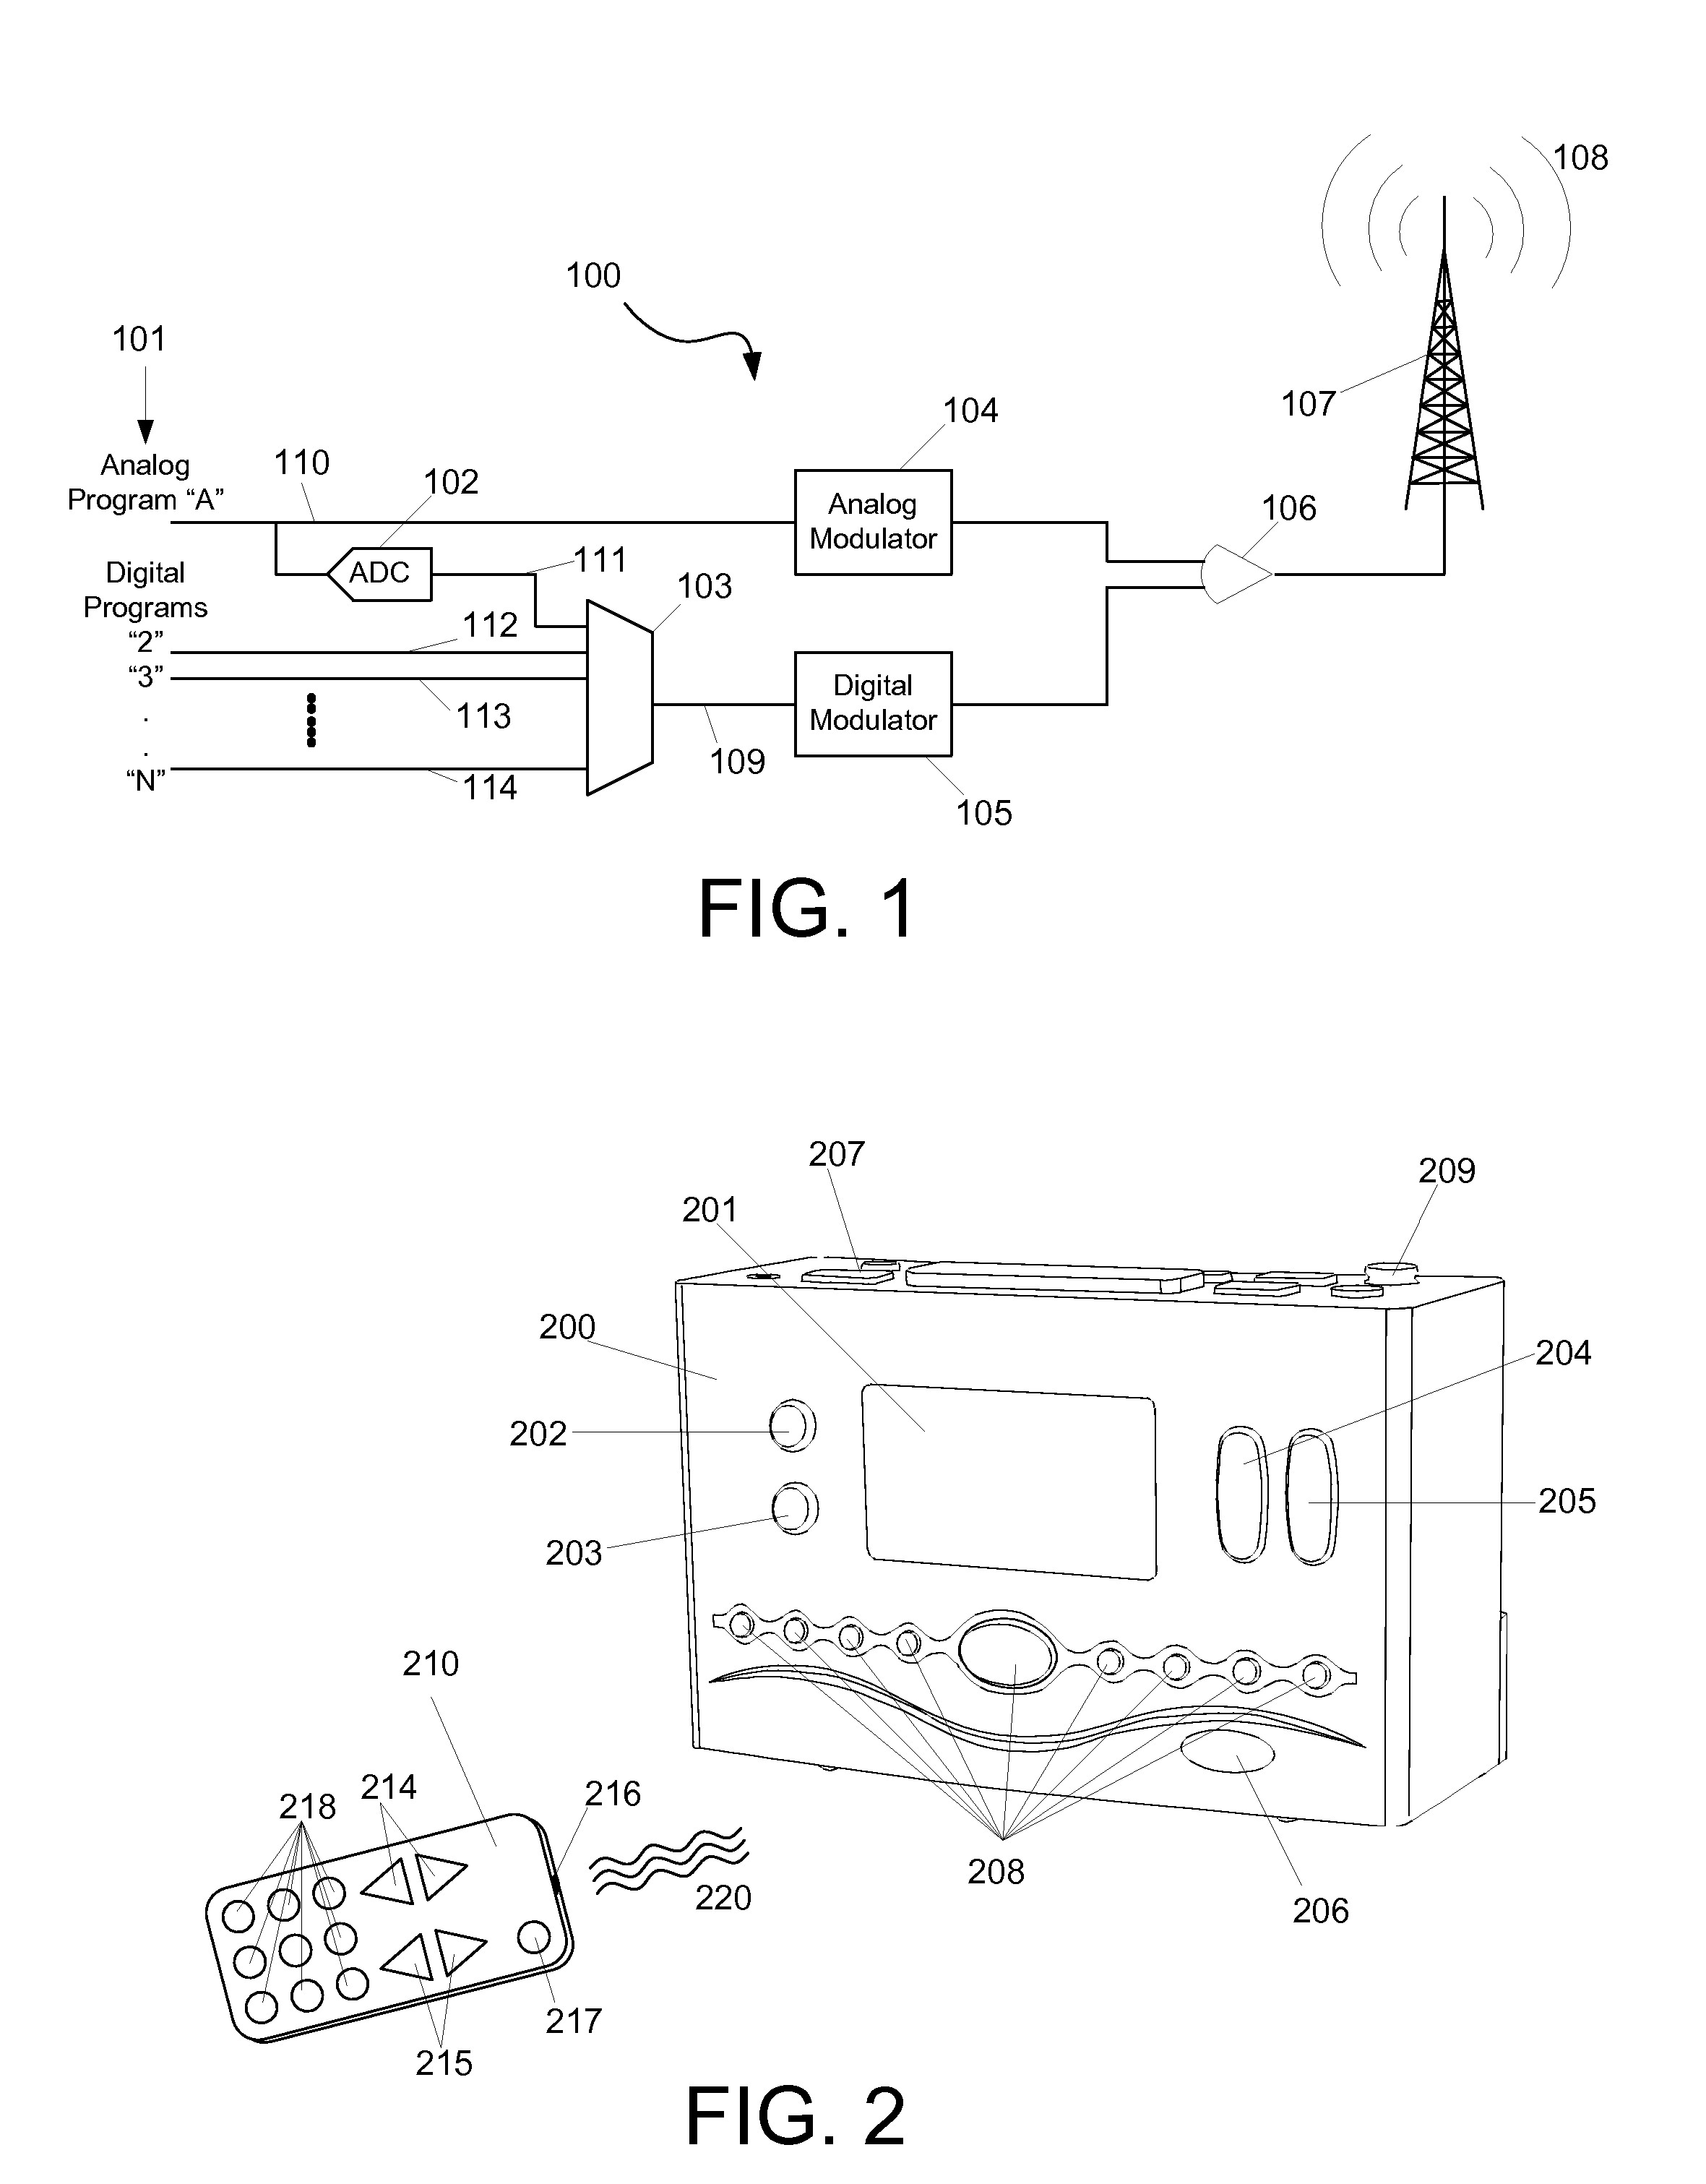 Method and Apparatus for Scanning for Digital Subchannels in a Hybrid Analog/Digital Broadcast